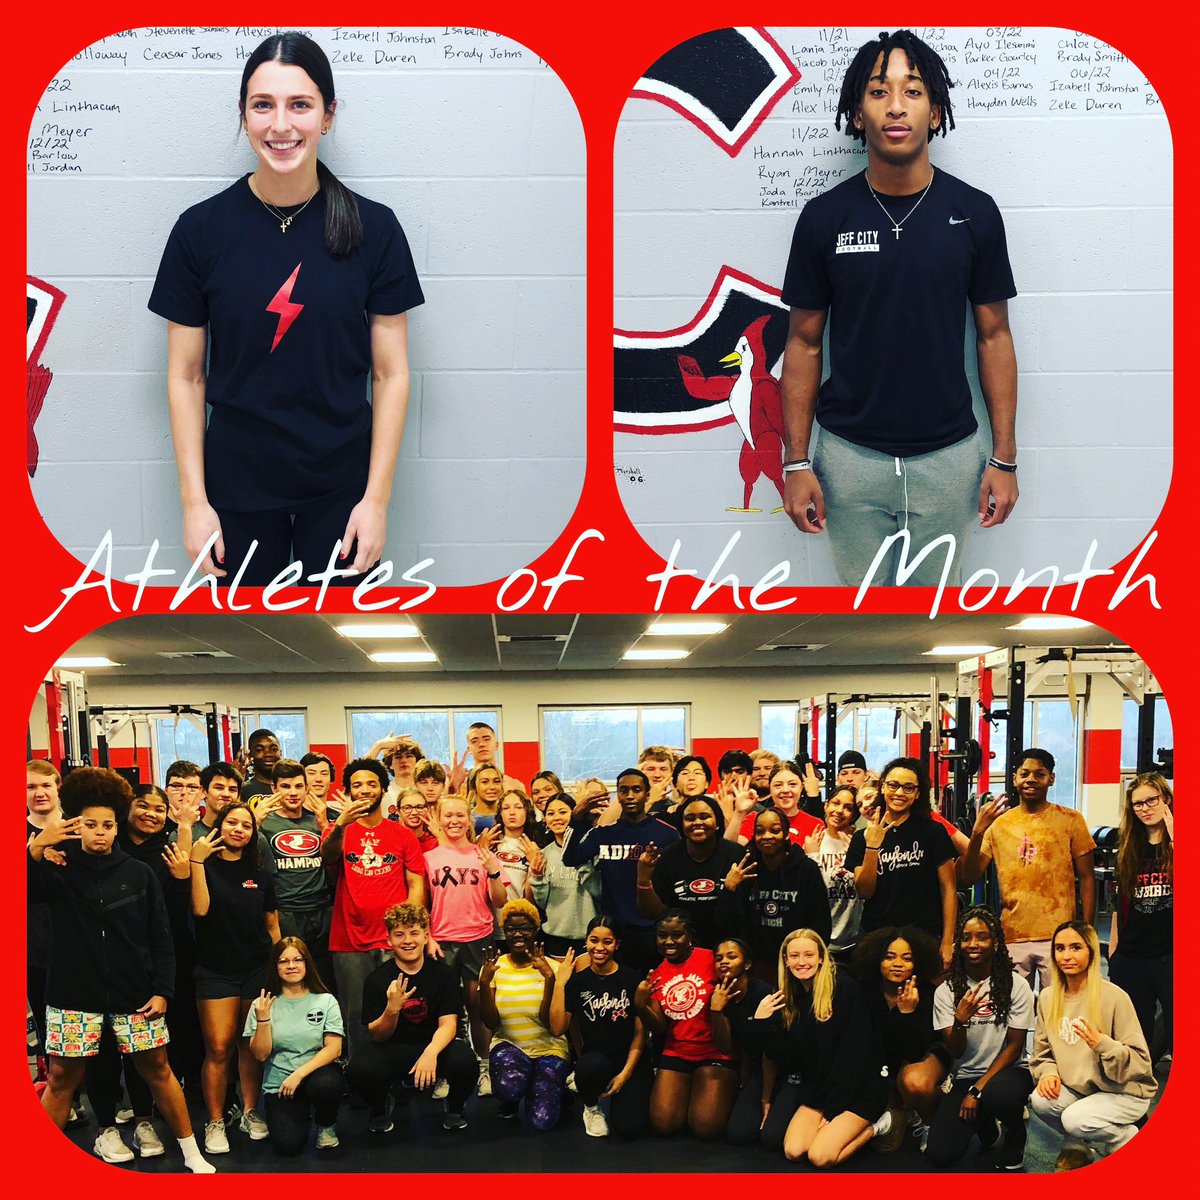 Shout out to our Athletes of the Month for January!! The start of the Spring Semester has proven 3rd Block to be a force to be reckoned with…our biggest class at 48 but they bring the energy unlike any other block. Female: Avrey R ; Male: Josh W ; Group: 3rd Block.